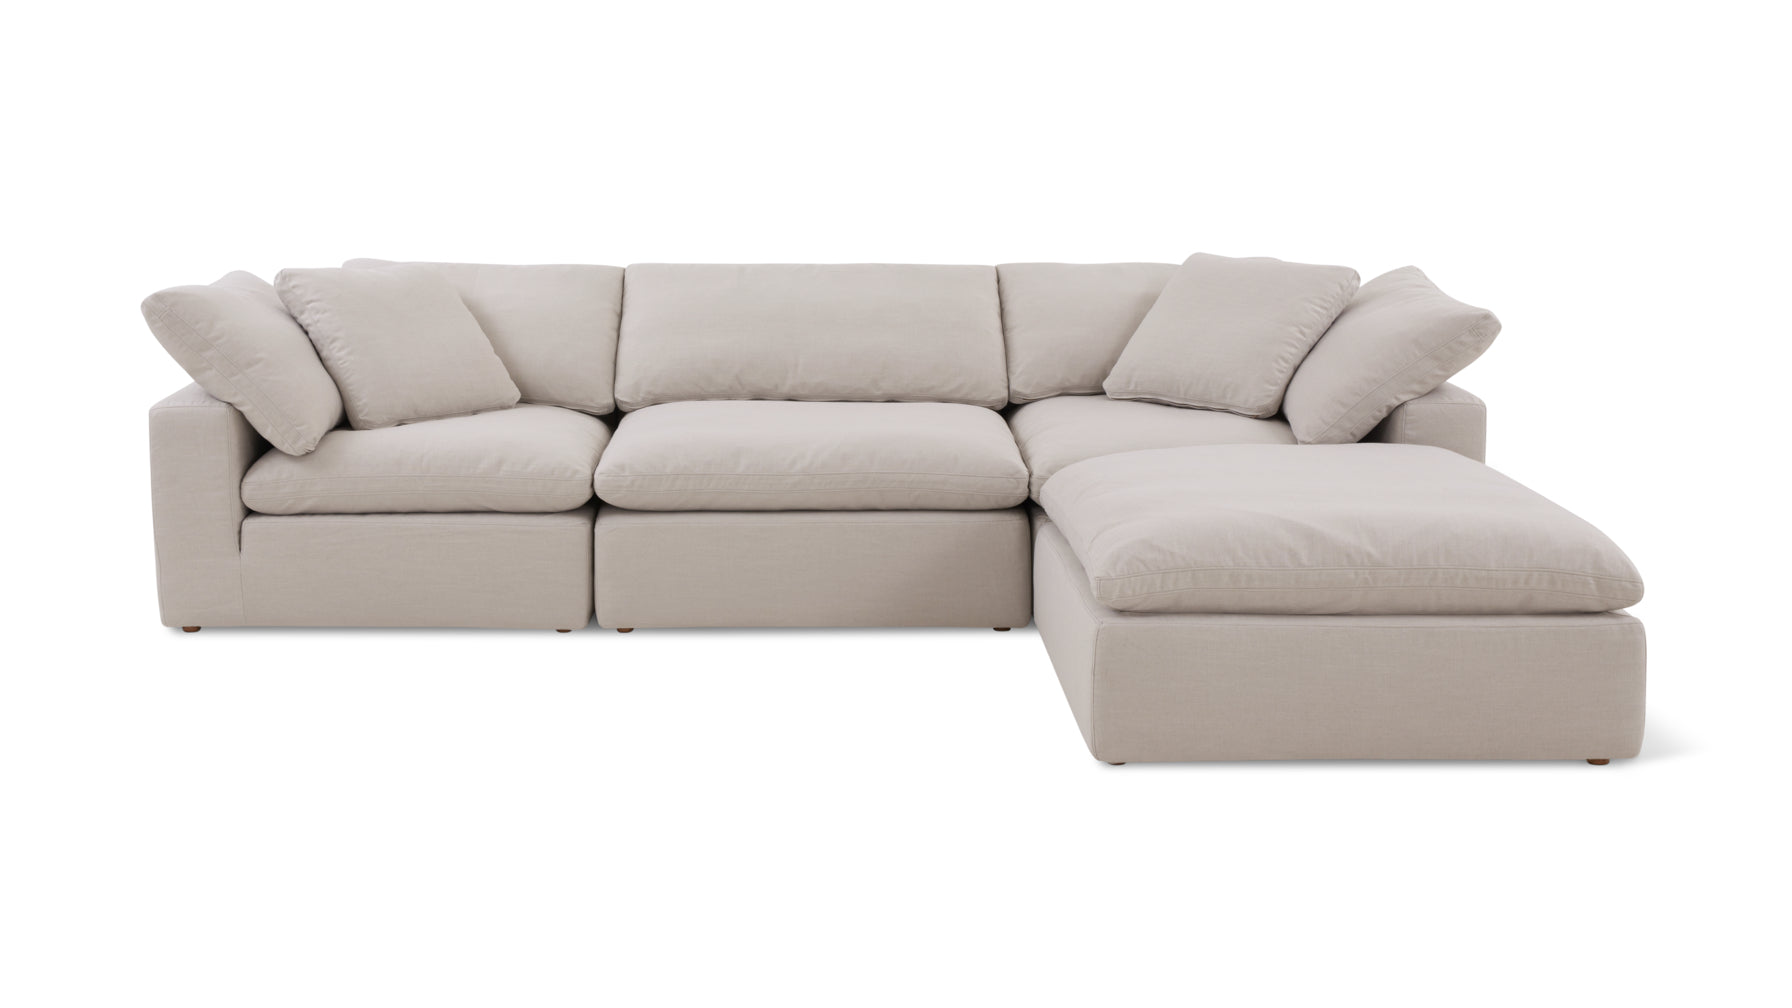 Movie Night™ 4-Piece Modular Sectional, Large, Clay - Image 1